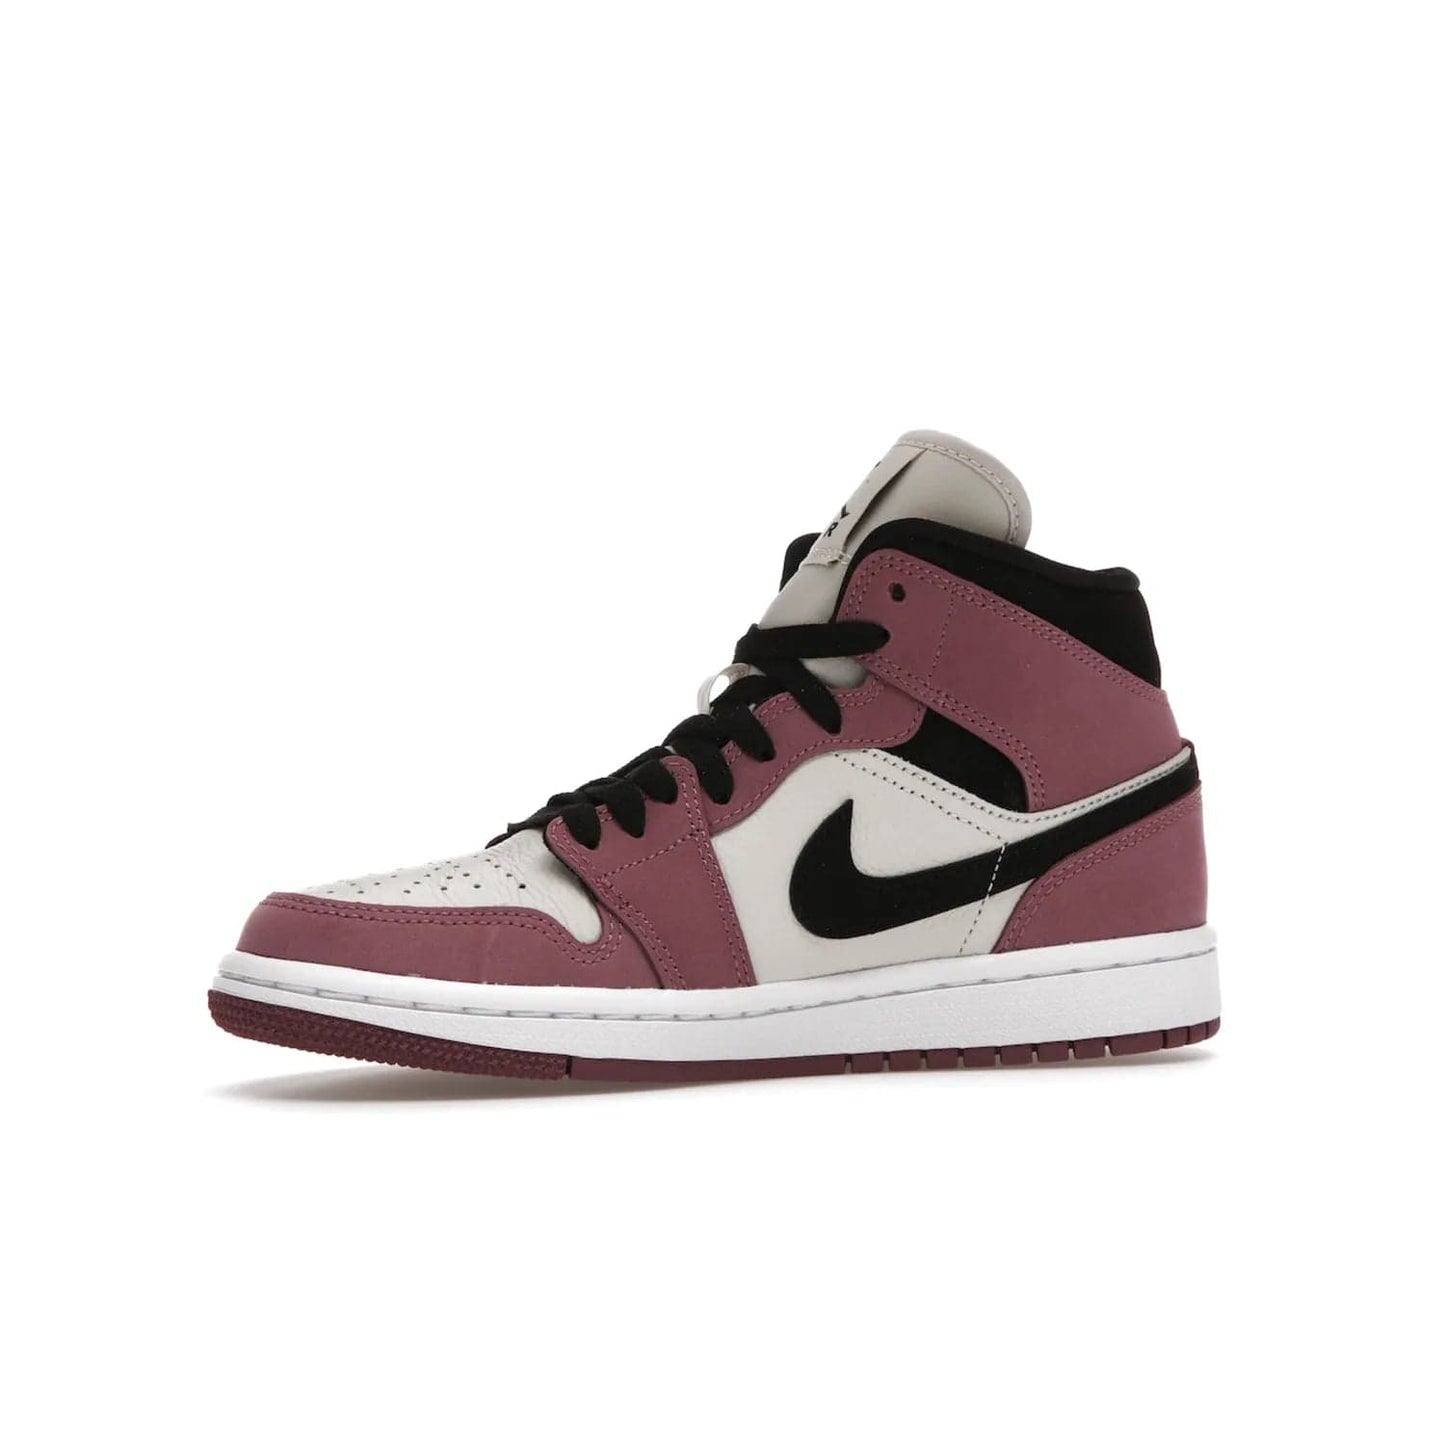 Jordan 1 Mid SE Light Mulberry (Women's) - Image 17 - Only at www.BallersClubKickz.com - Classic style meets performance with the Air Jordan 1 Mid Light Mulberry (Women's). Sleek leather overlays and light bone detailing bring out the best of this classic sneaker, perfect for the active woman on-the-go. Available March 2022.